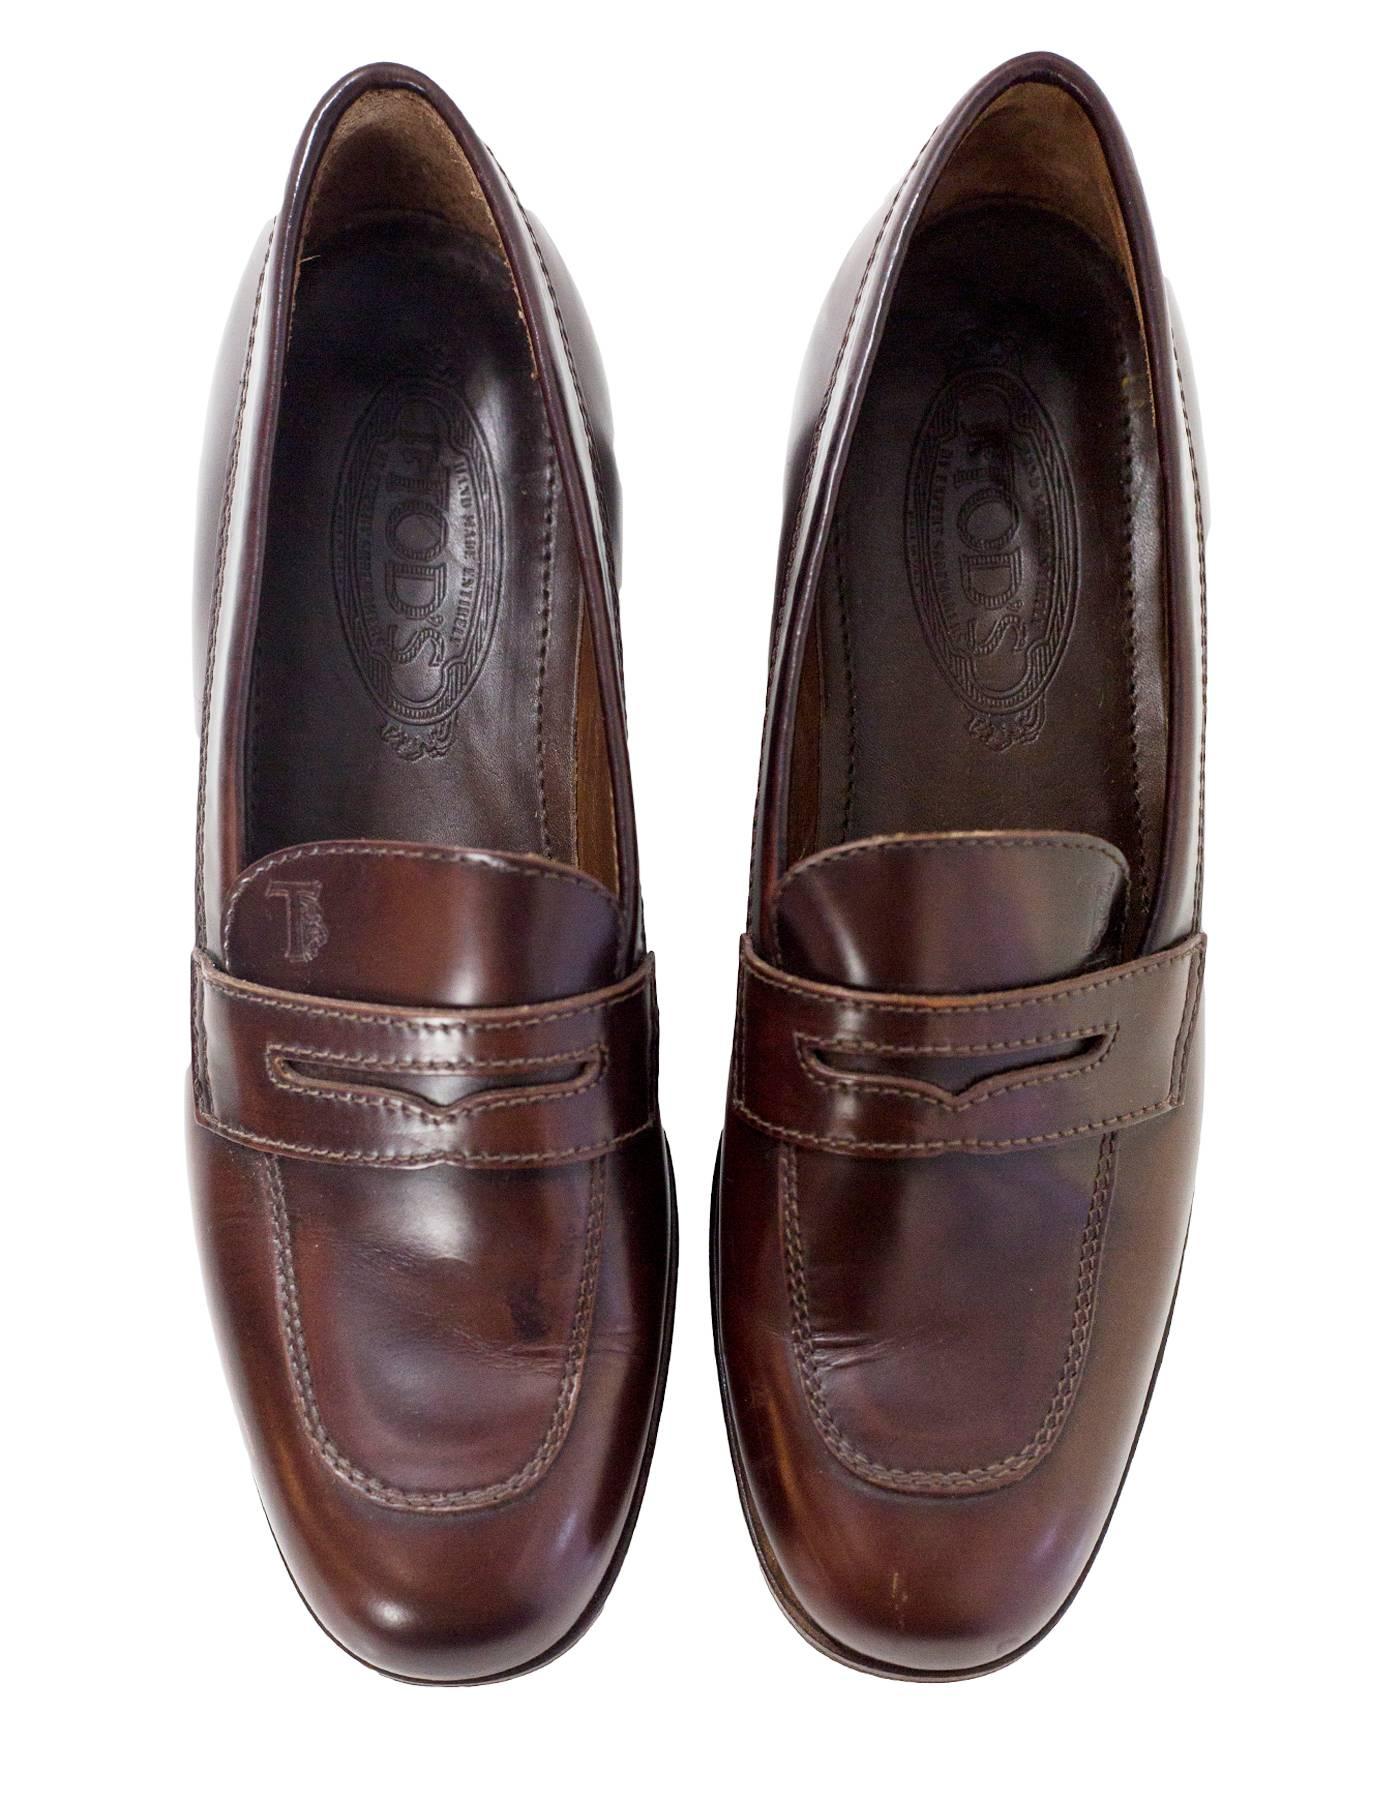 Black TOD's Brown Leather Loafers Sz 36.5